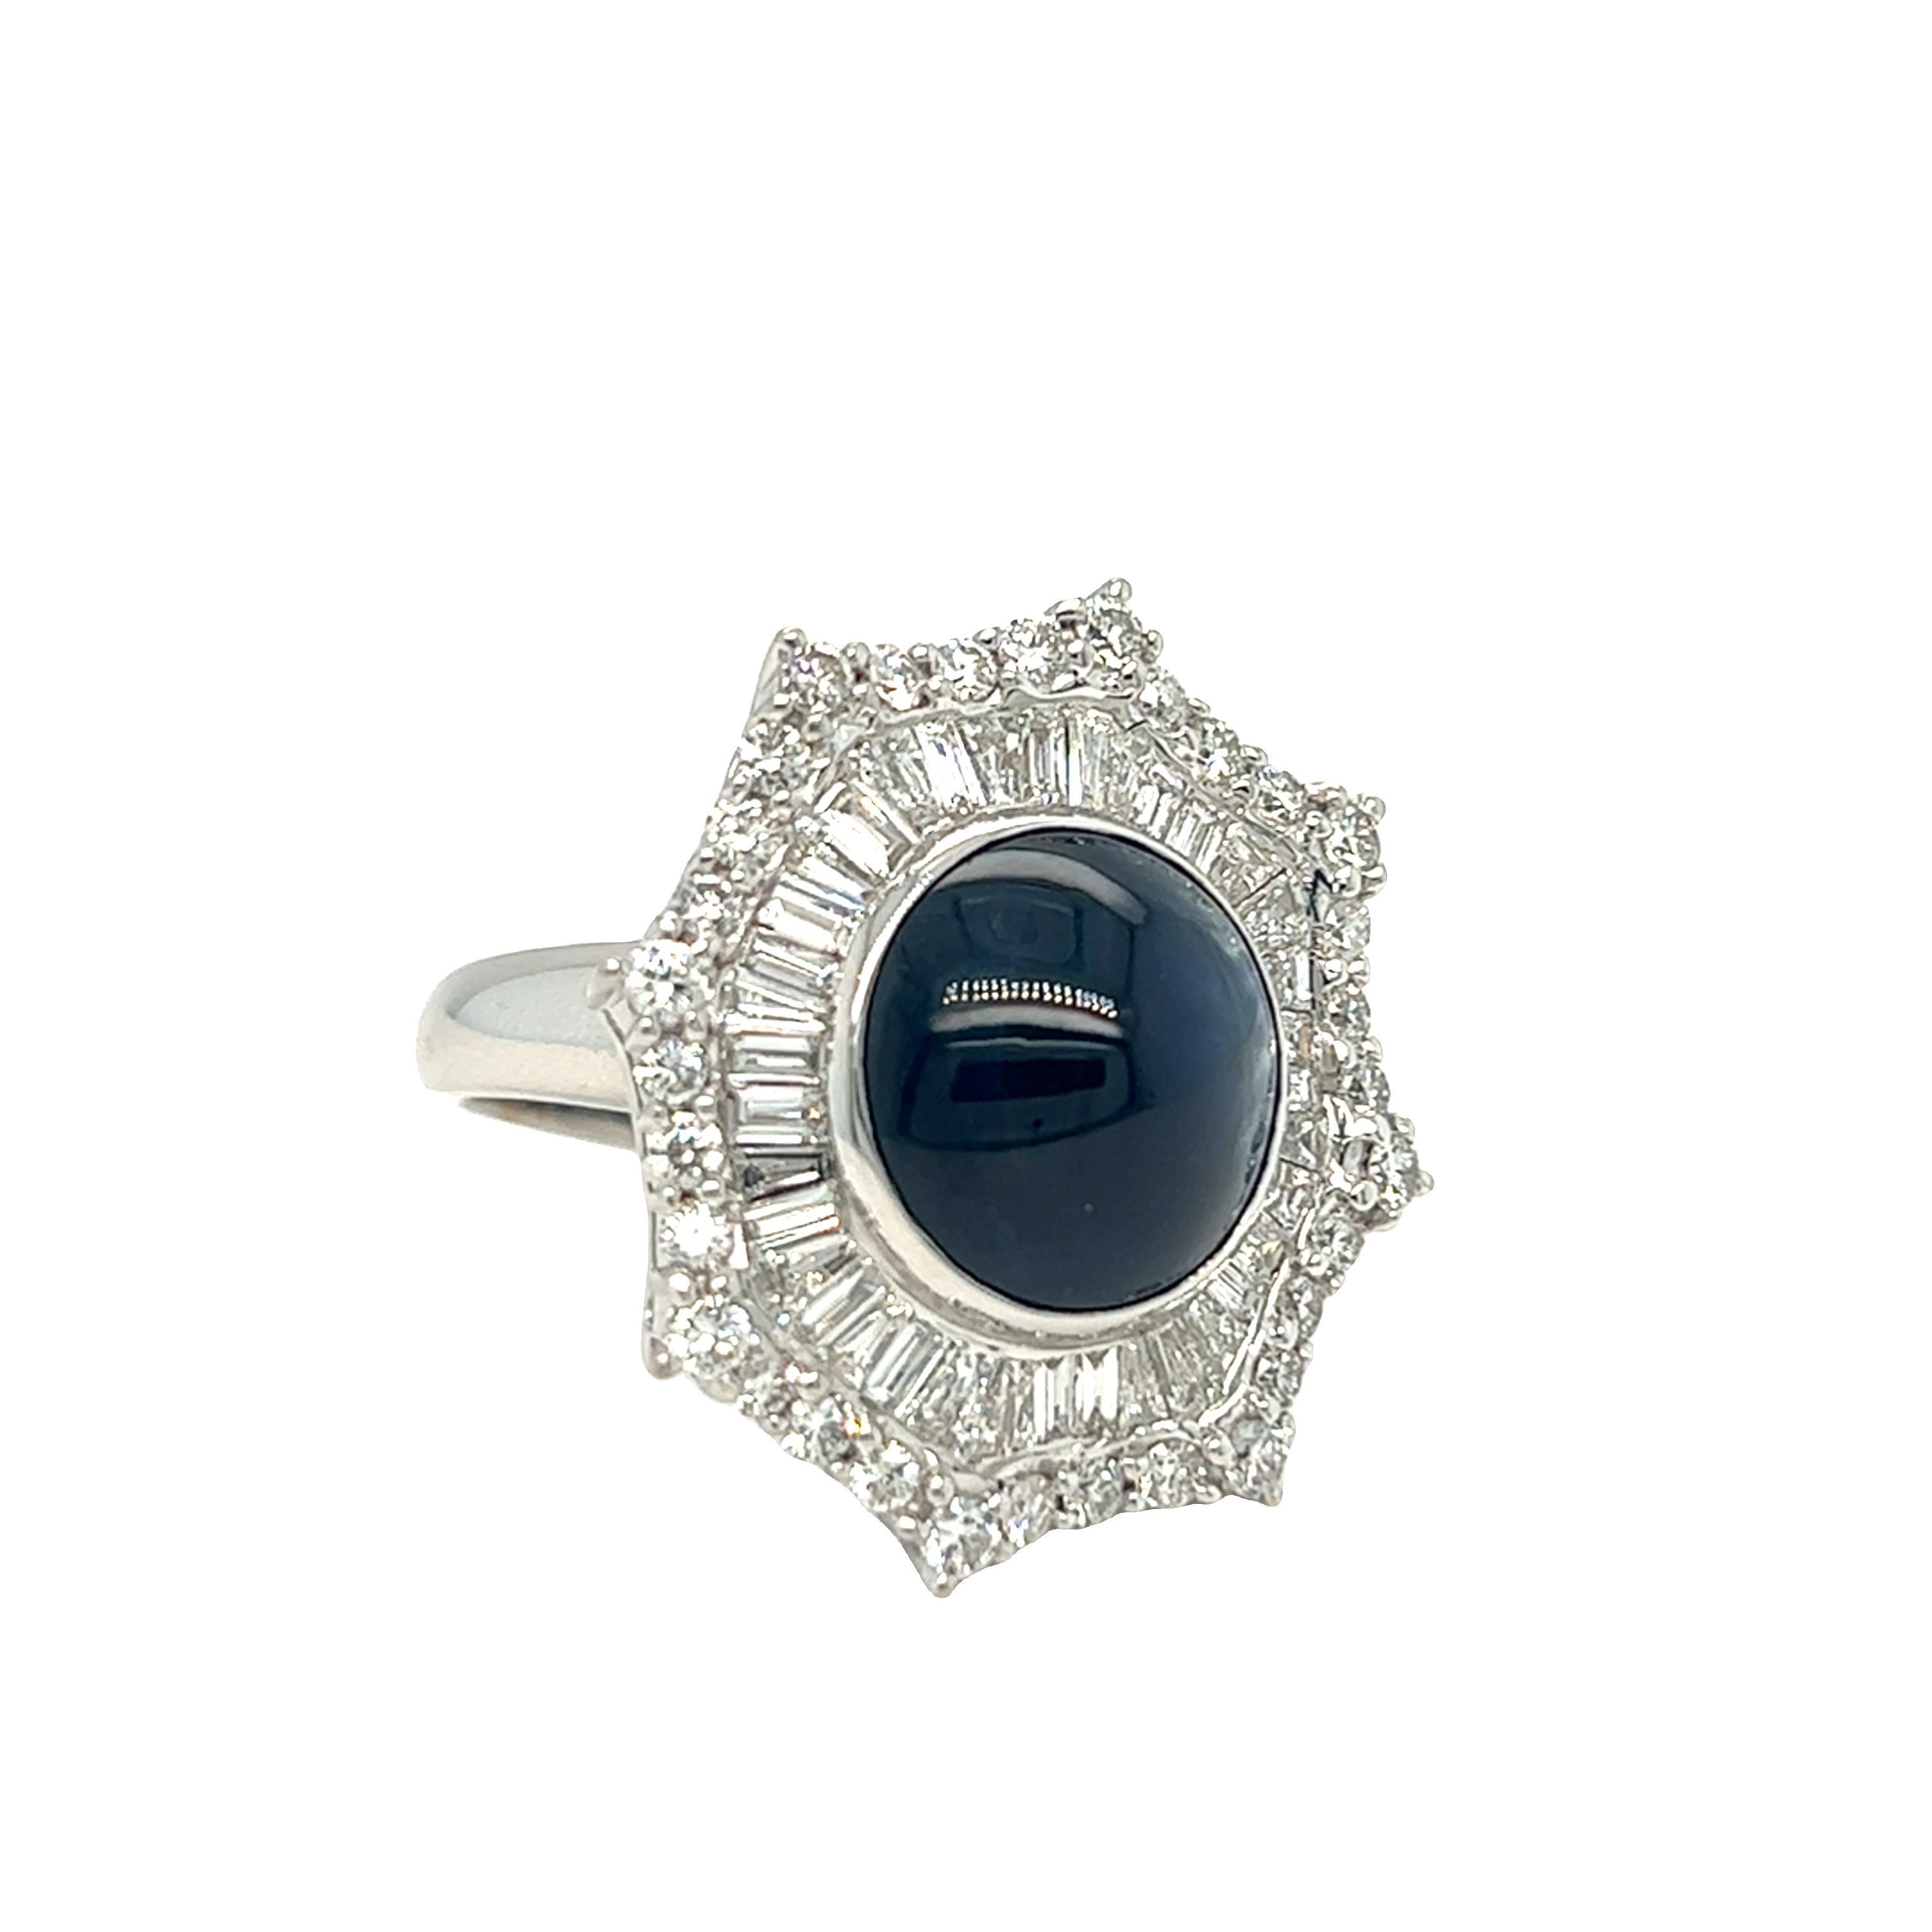 This stunning piece of jewelry is made of 18K white gold and features a starburst design. The ring has a classic style and is highlighted by a high-domed cabochon sapphire that weighs 8 carats. The sapphire is surrounded by a halo of round